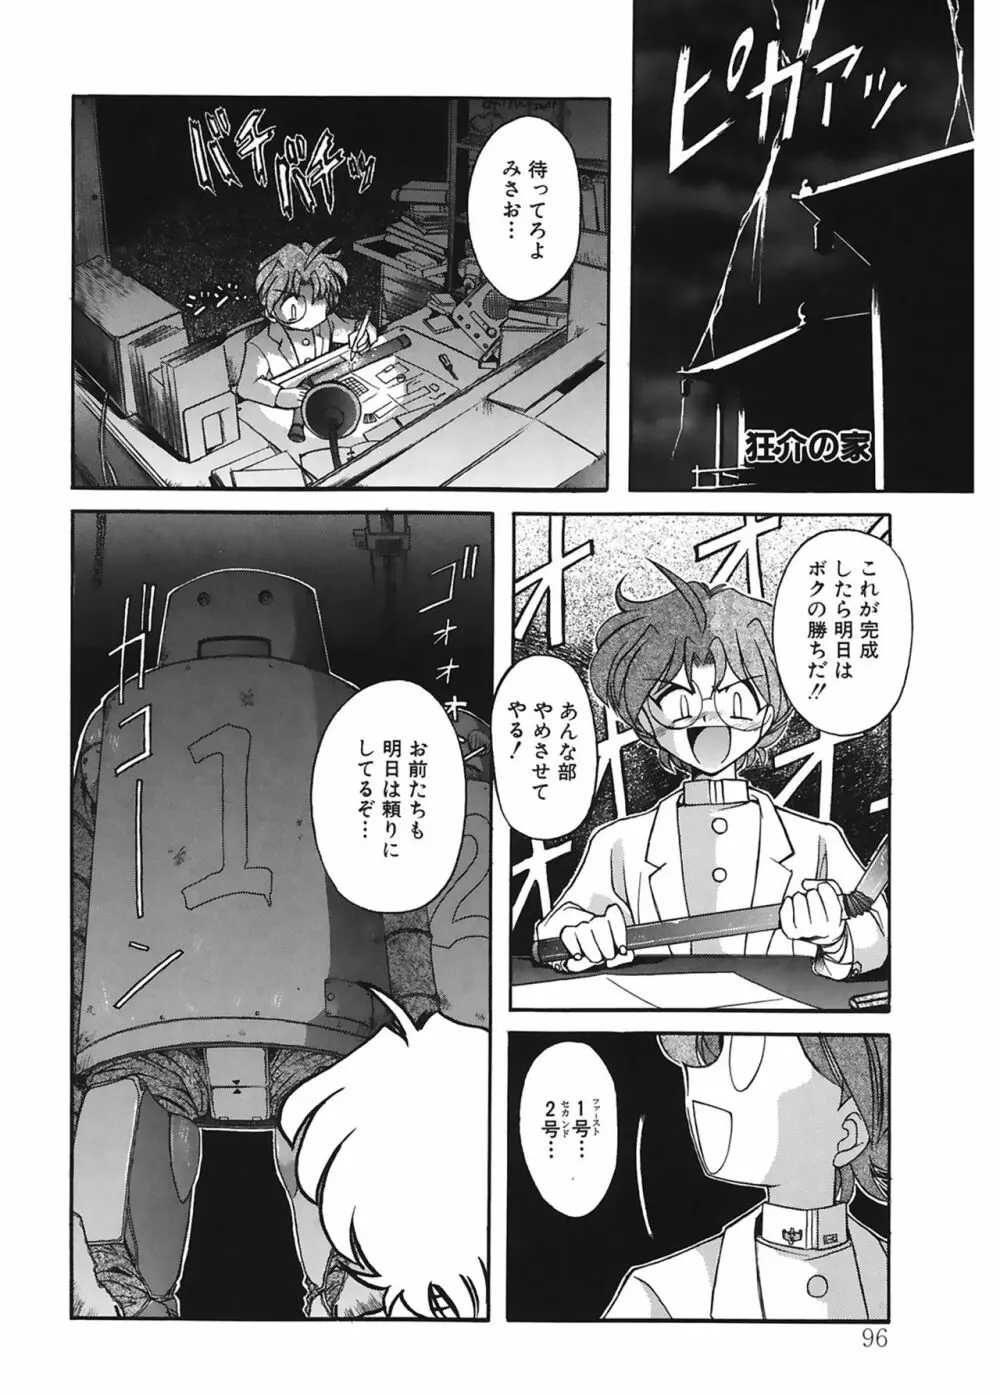 JACK UP featuring徳川玄徳 Page.96